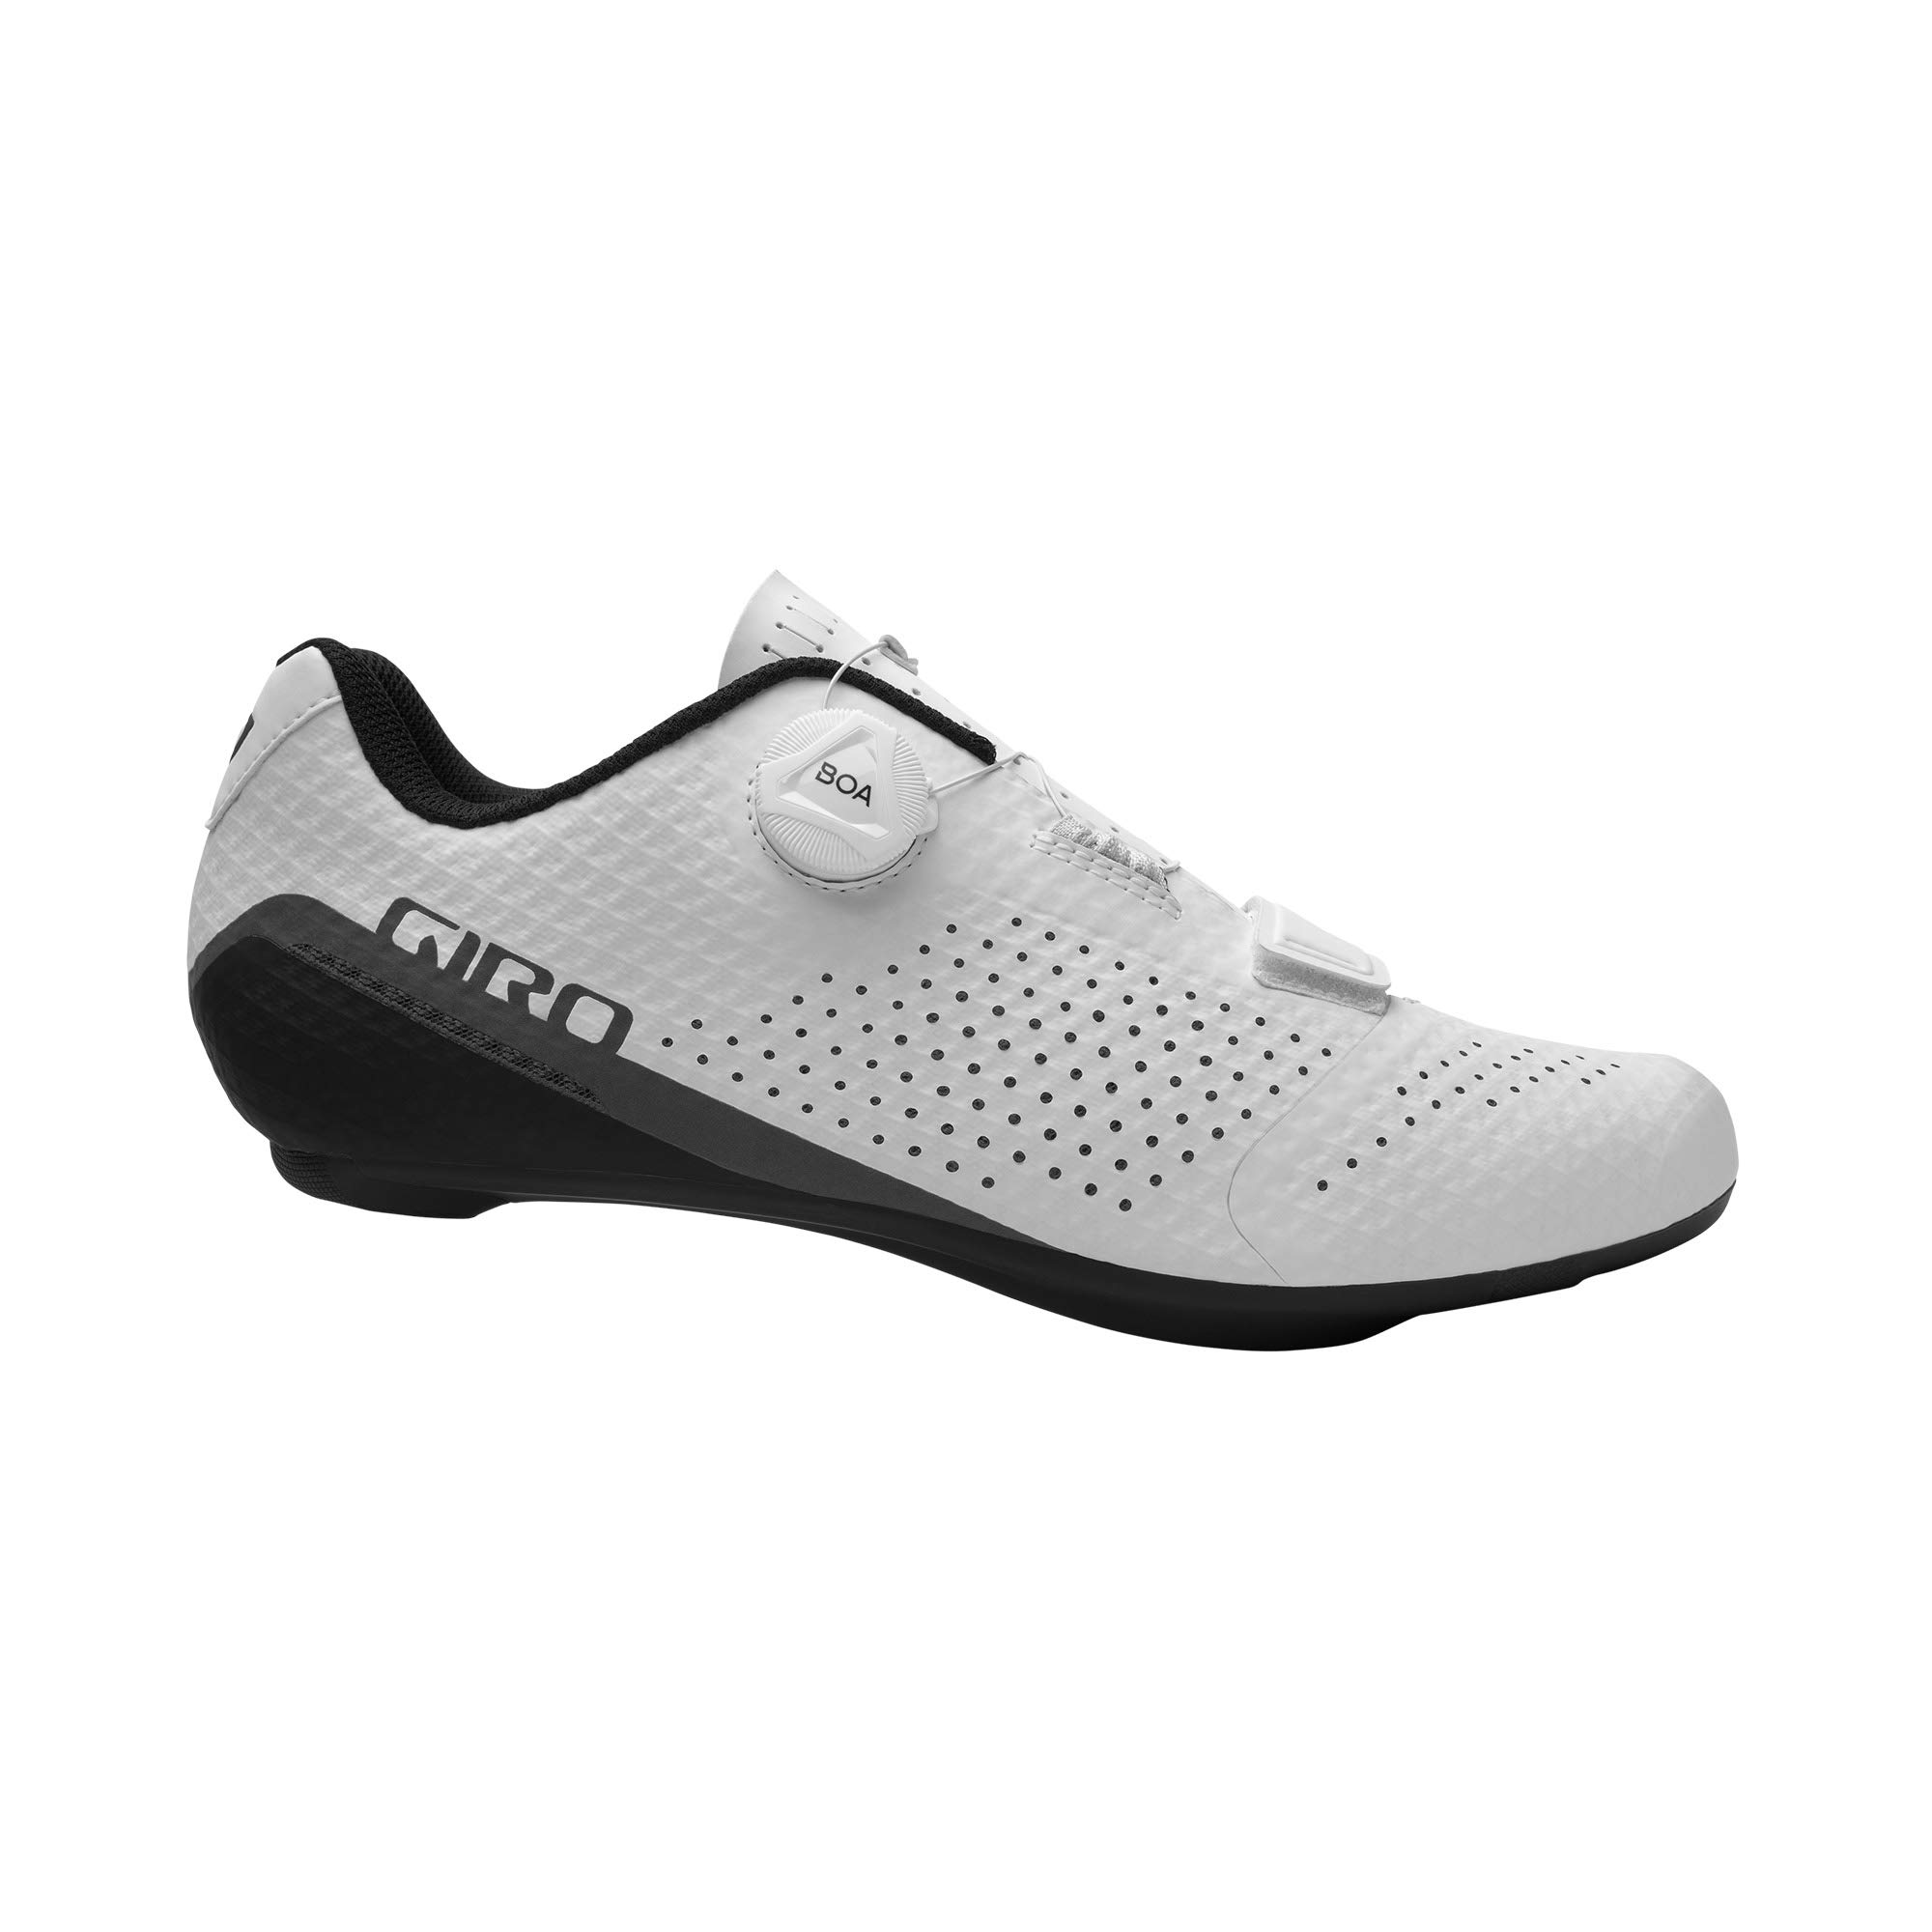 Giro Cadet Men's Indoors and Outdoors Clipless Road Cycling Shoes - Inspired Road Cycling Performance with Lasting Comfort & Value